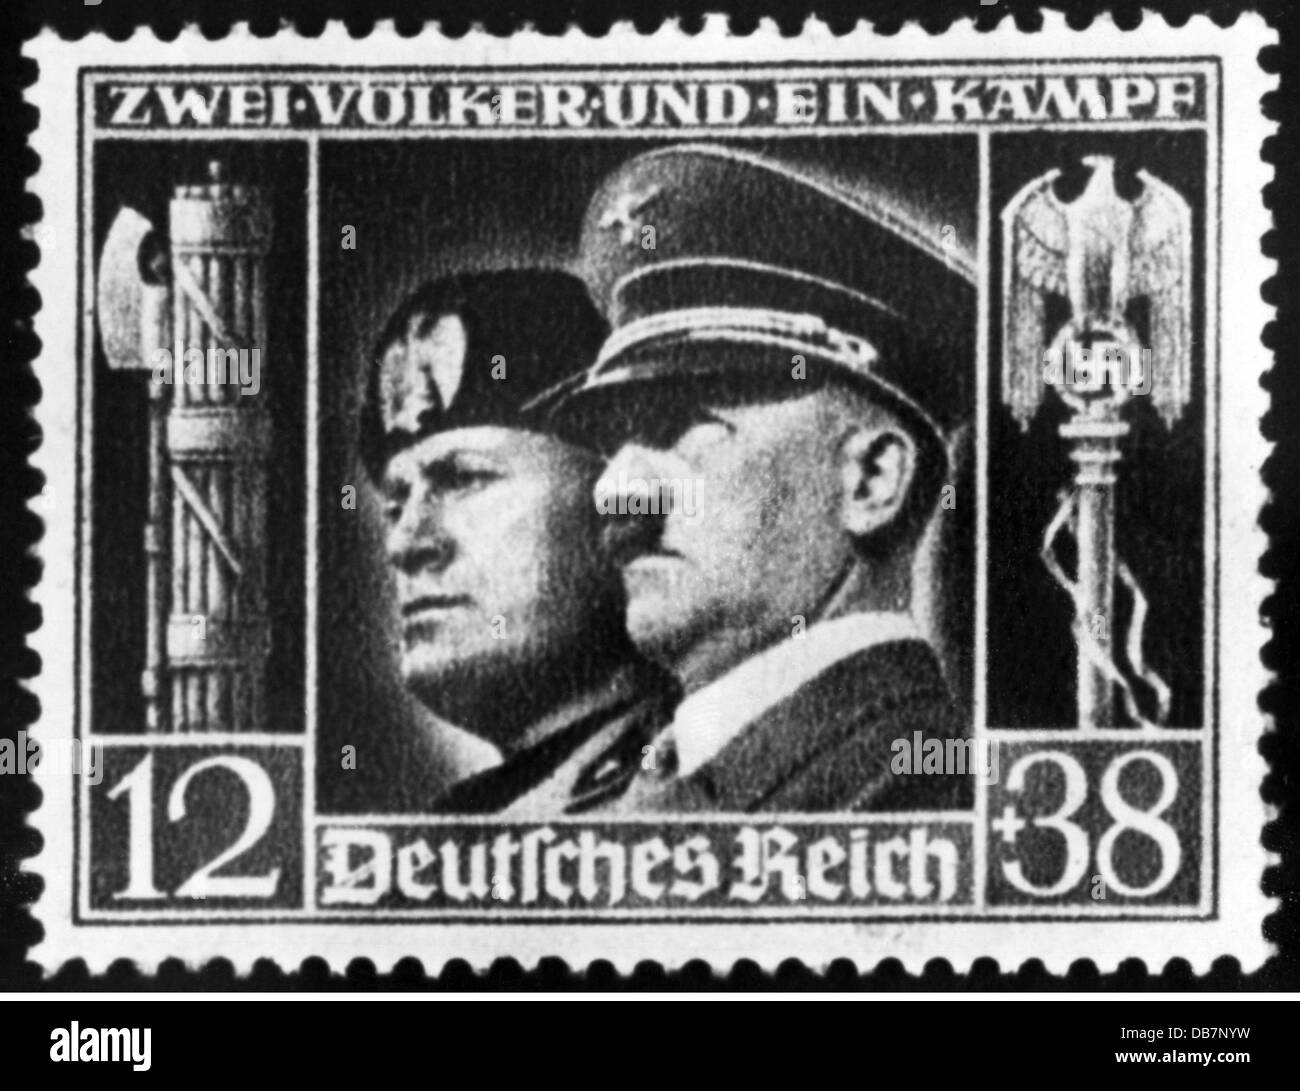 mail, postage stamps, Germany, 12 + 38 pfennig special issue, 1941, Additional-Rights-Clearences-Not Available Stock Photo